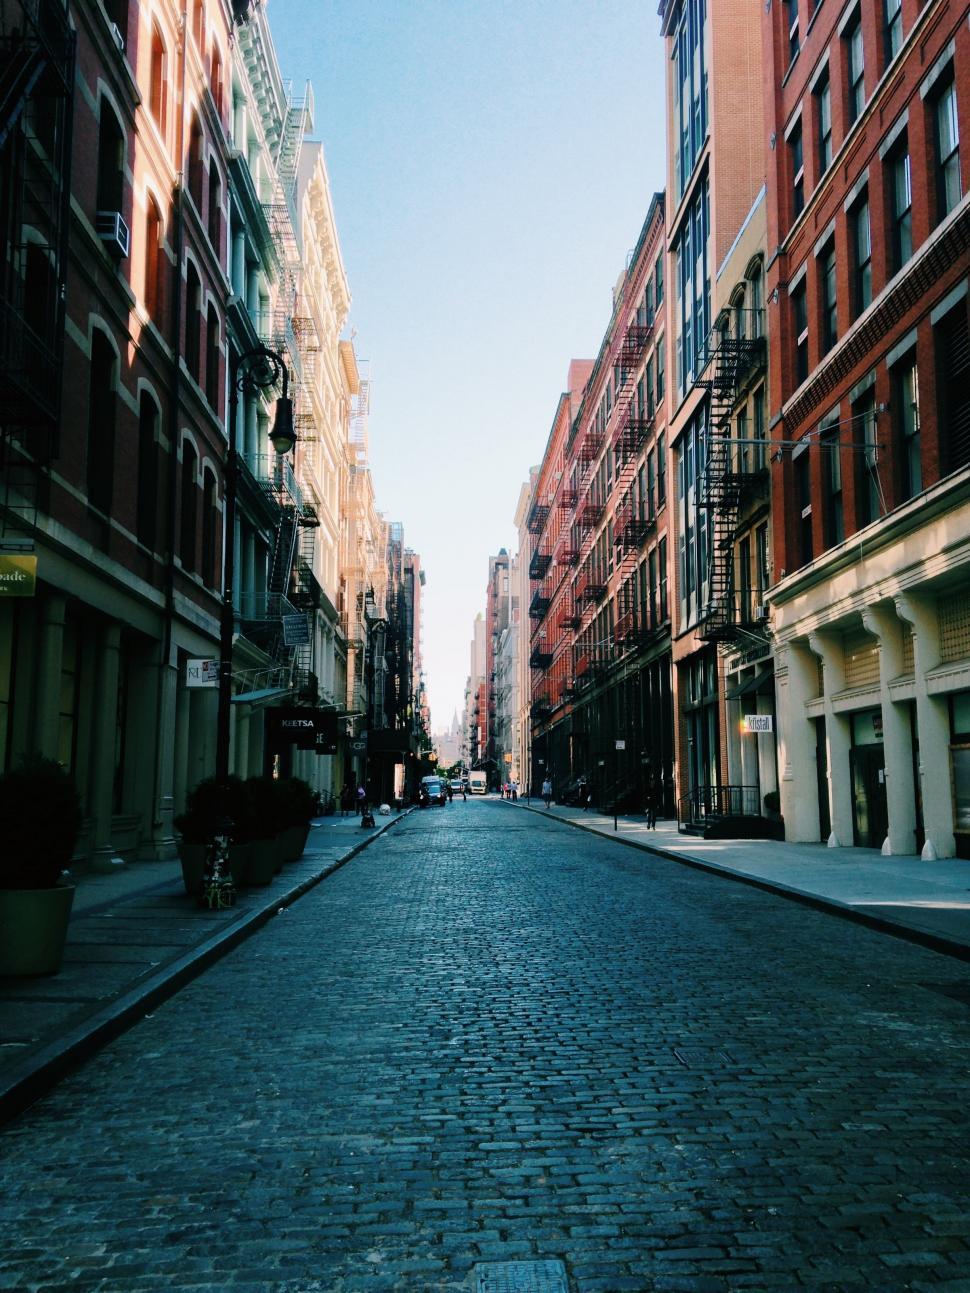 Free Image of Historic Cobblestone Street Flanked by Tall Buildings 